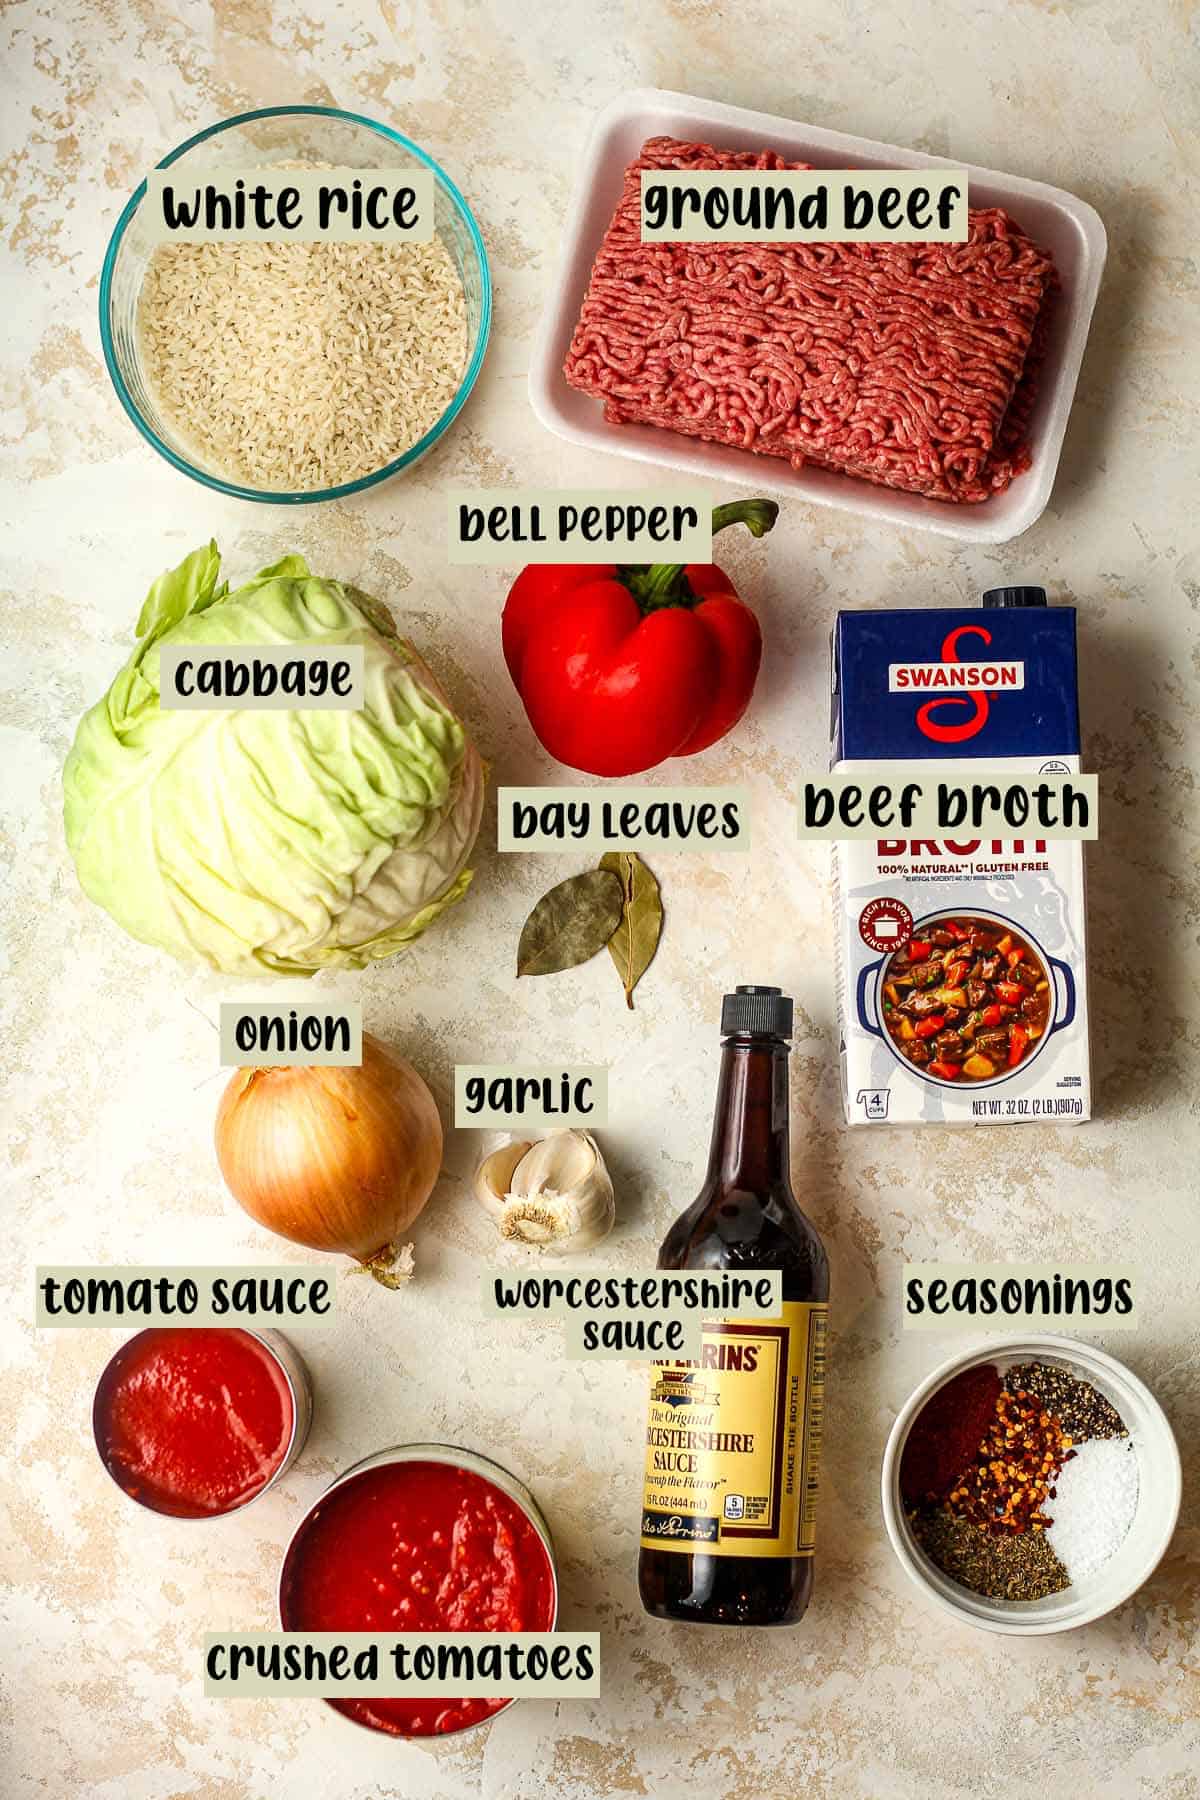 The ingredients for the stuffed cabbage soup.